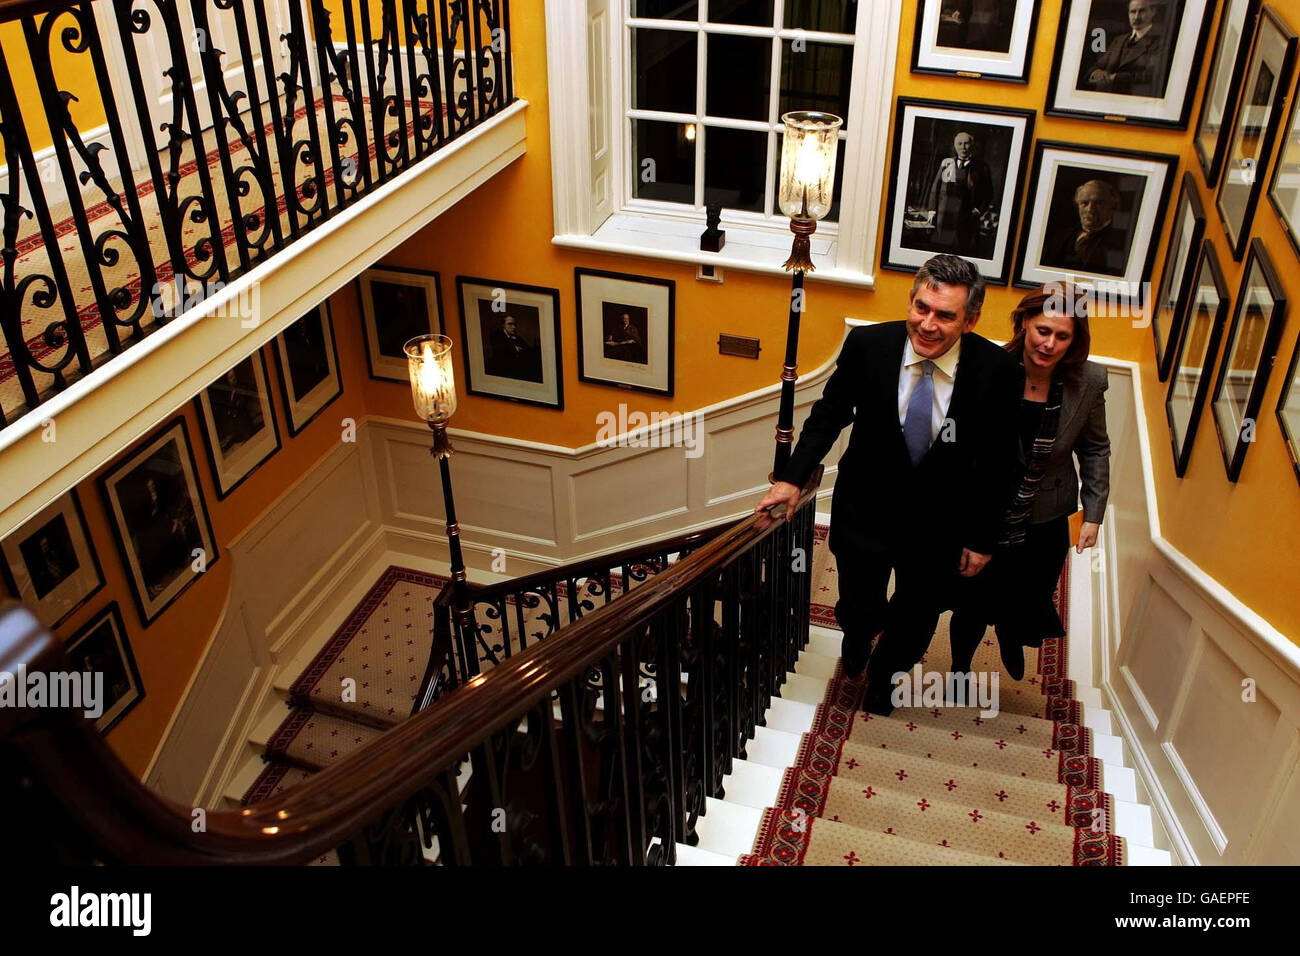 Britain's Prime Minister Gordon Brown and his wife Sarah at 10 Downing Street, London, where they held a reception for the Terrence Higgins Trust, London. Stock Photo